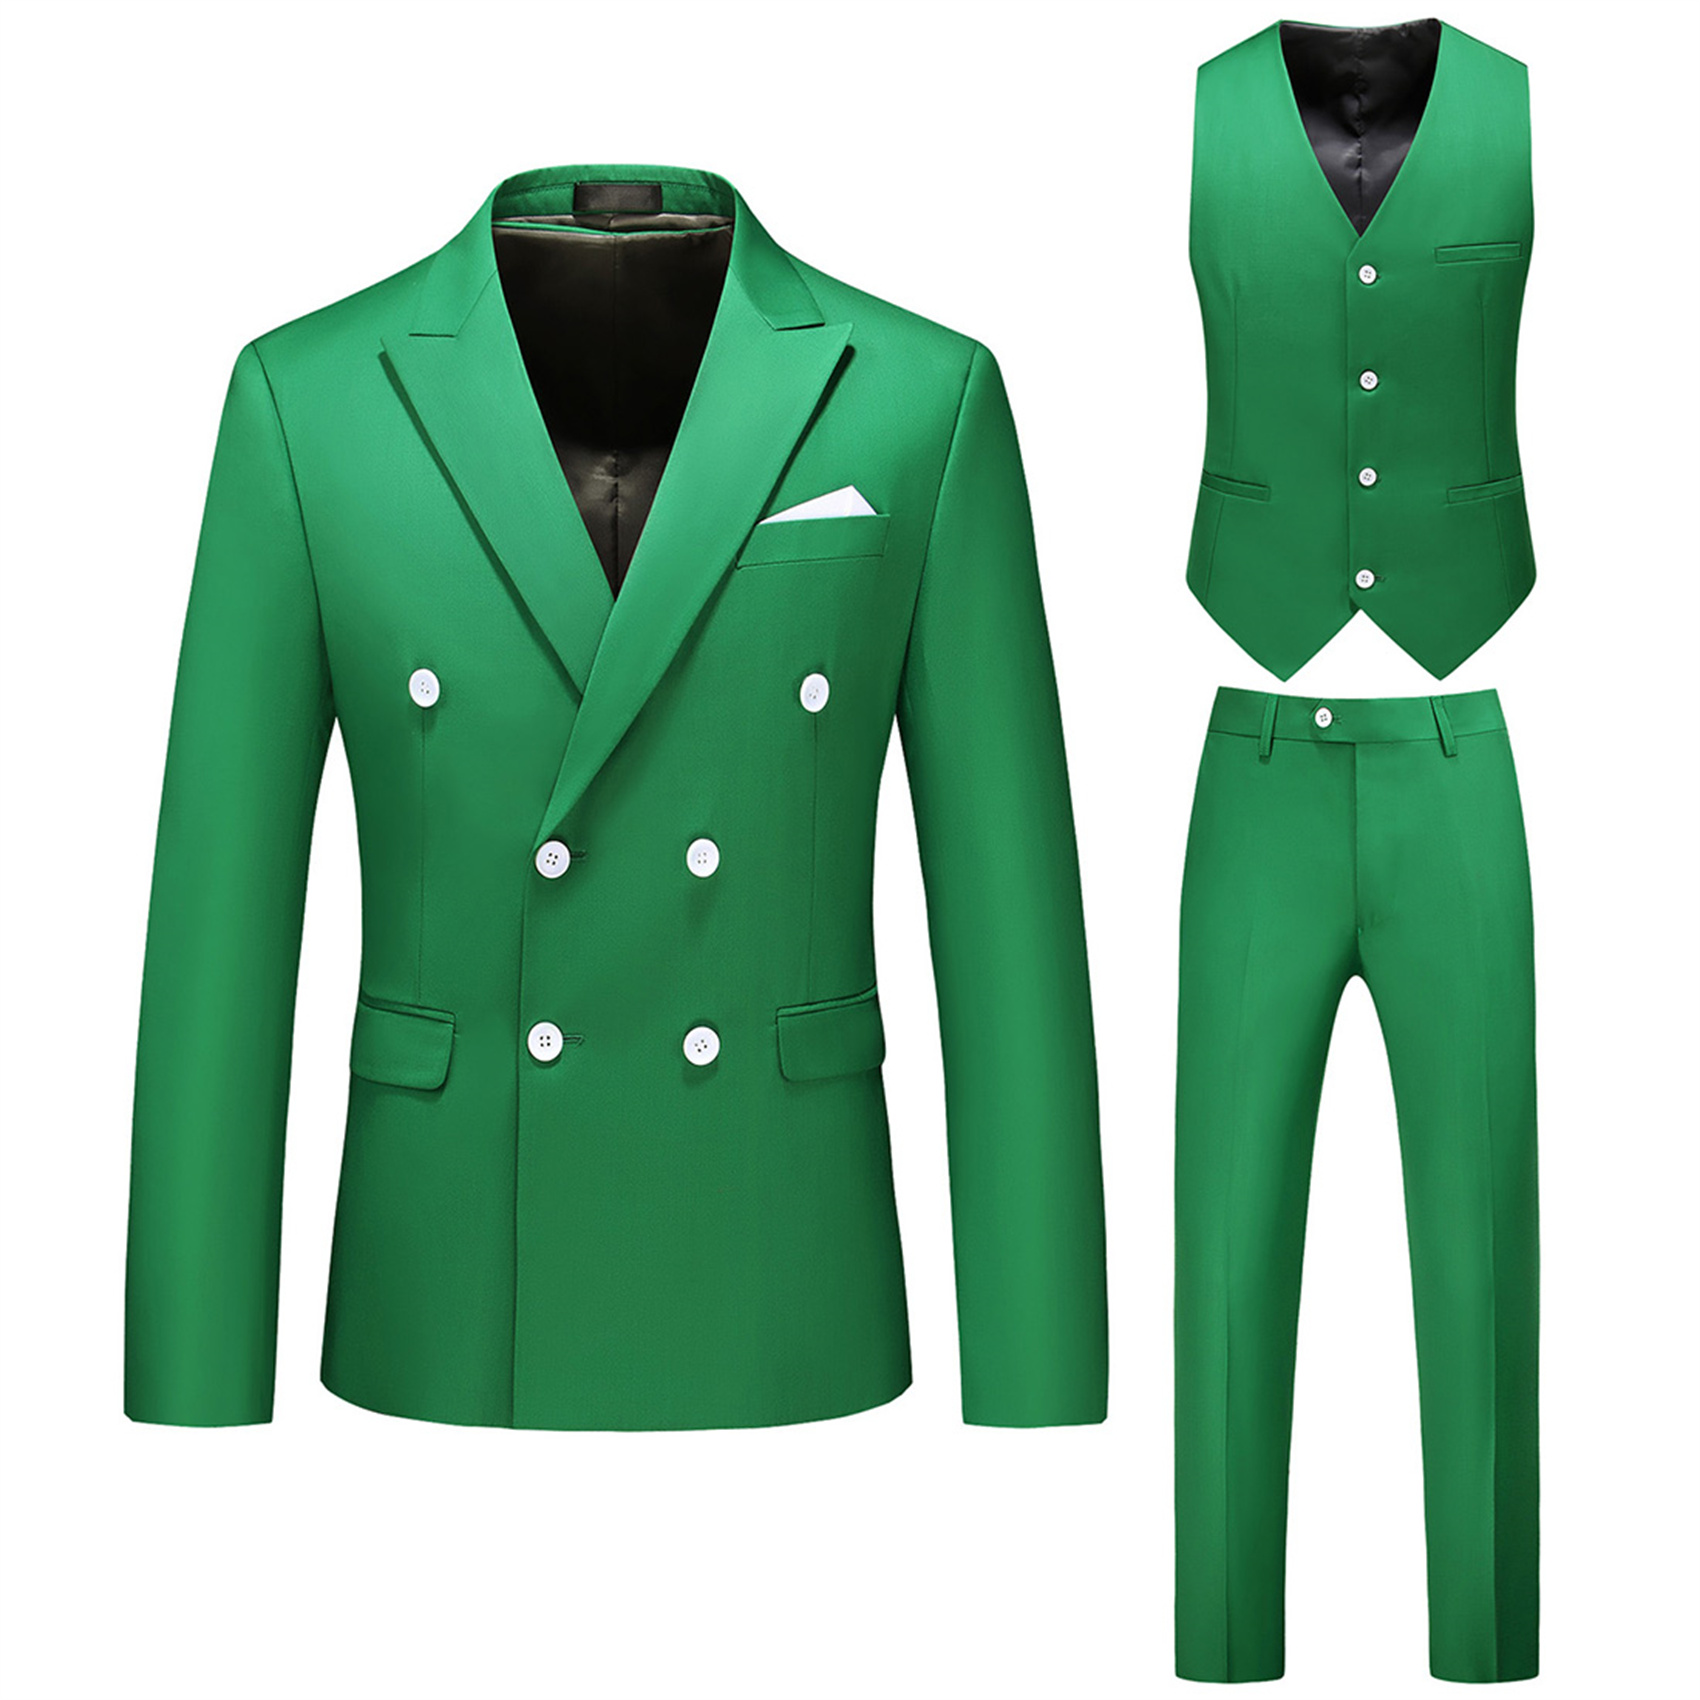 3 Piece Double Breasted Suit for Men, Slim Fit, Green